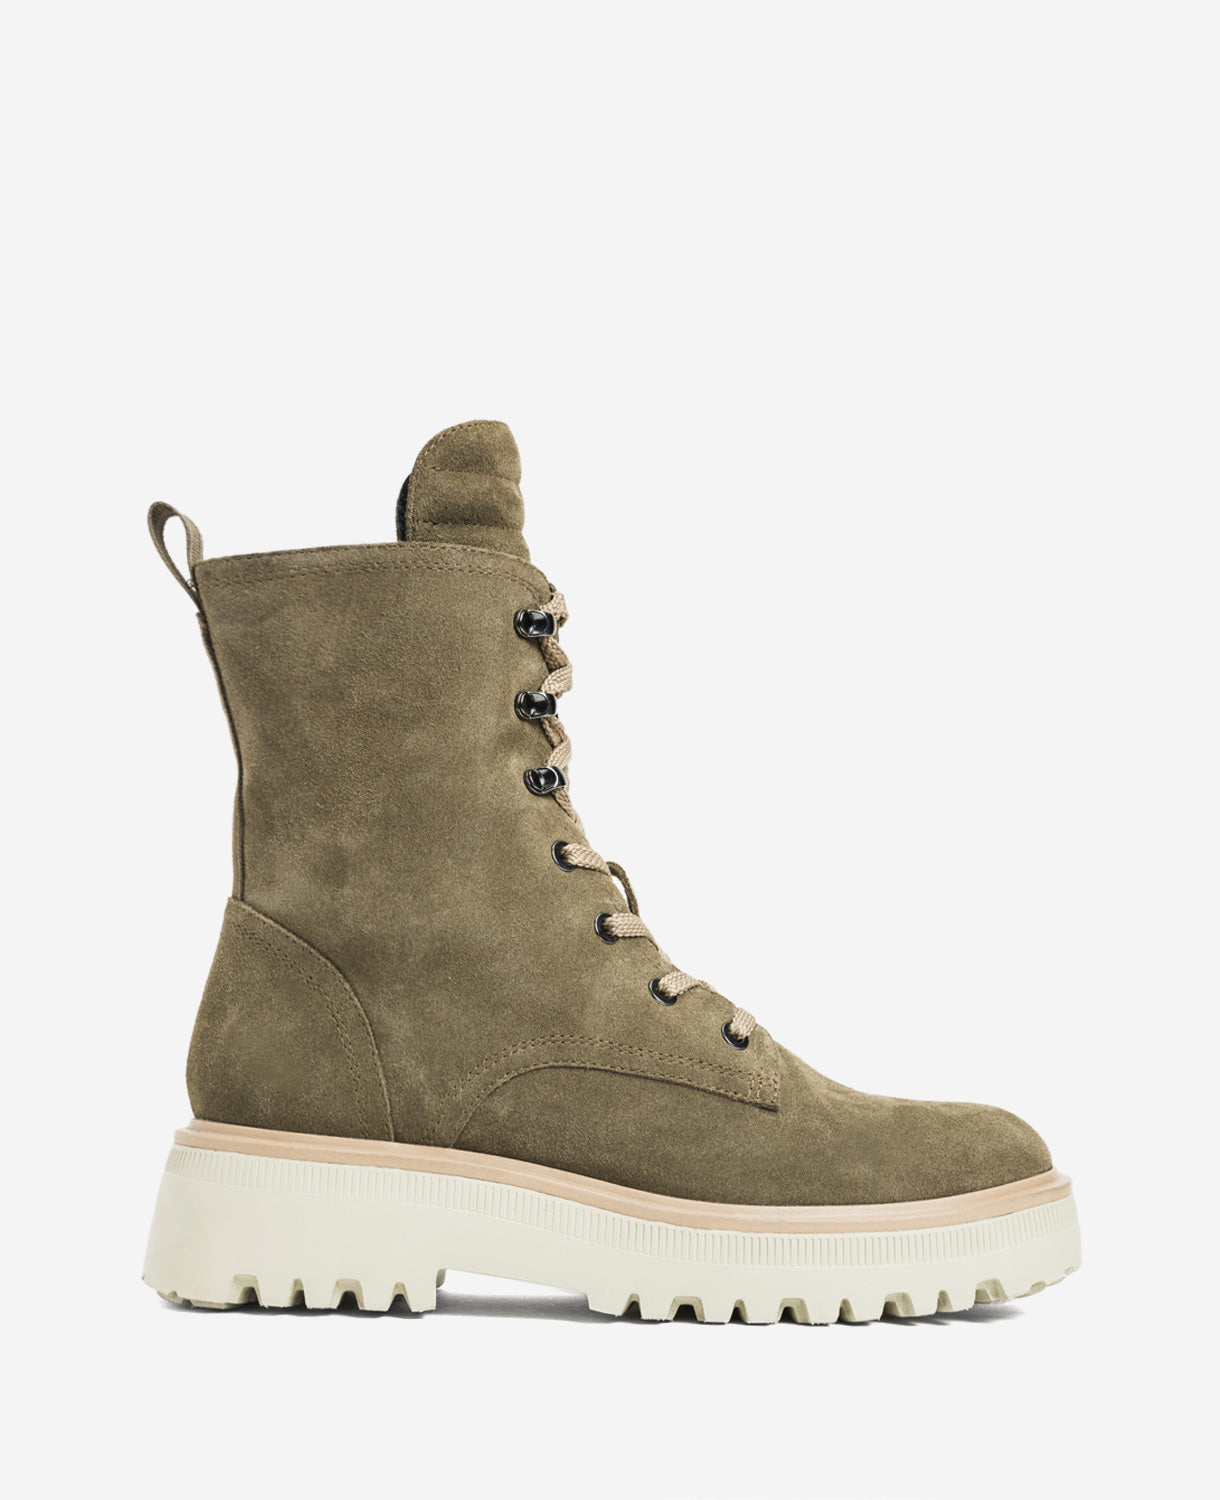 KENNETH COLE RADELL LACE-UP BOOT